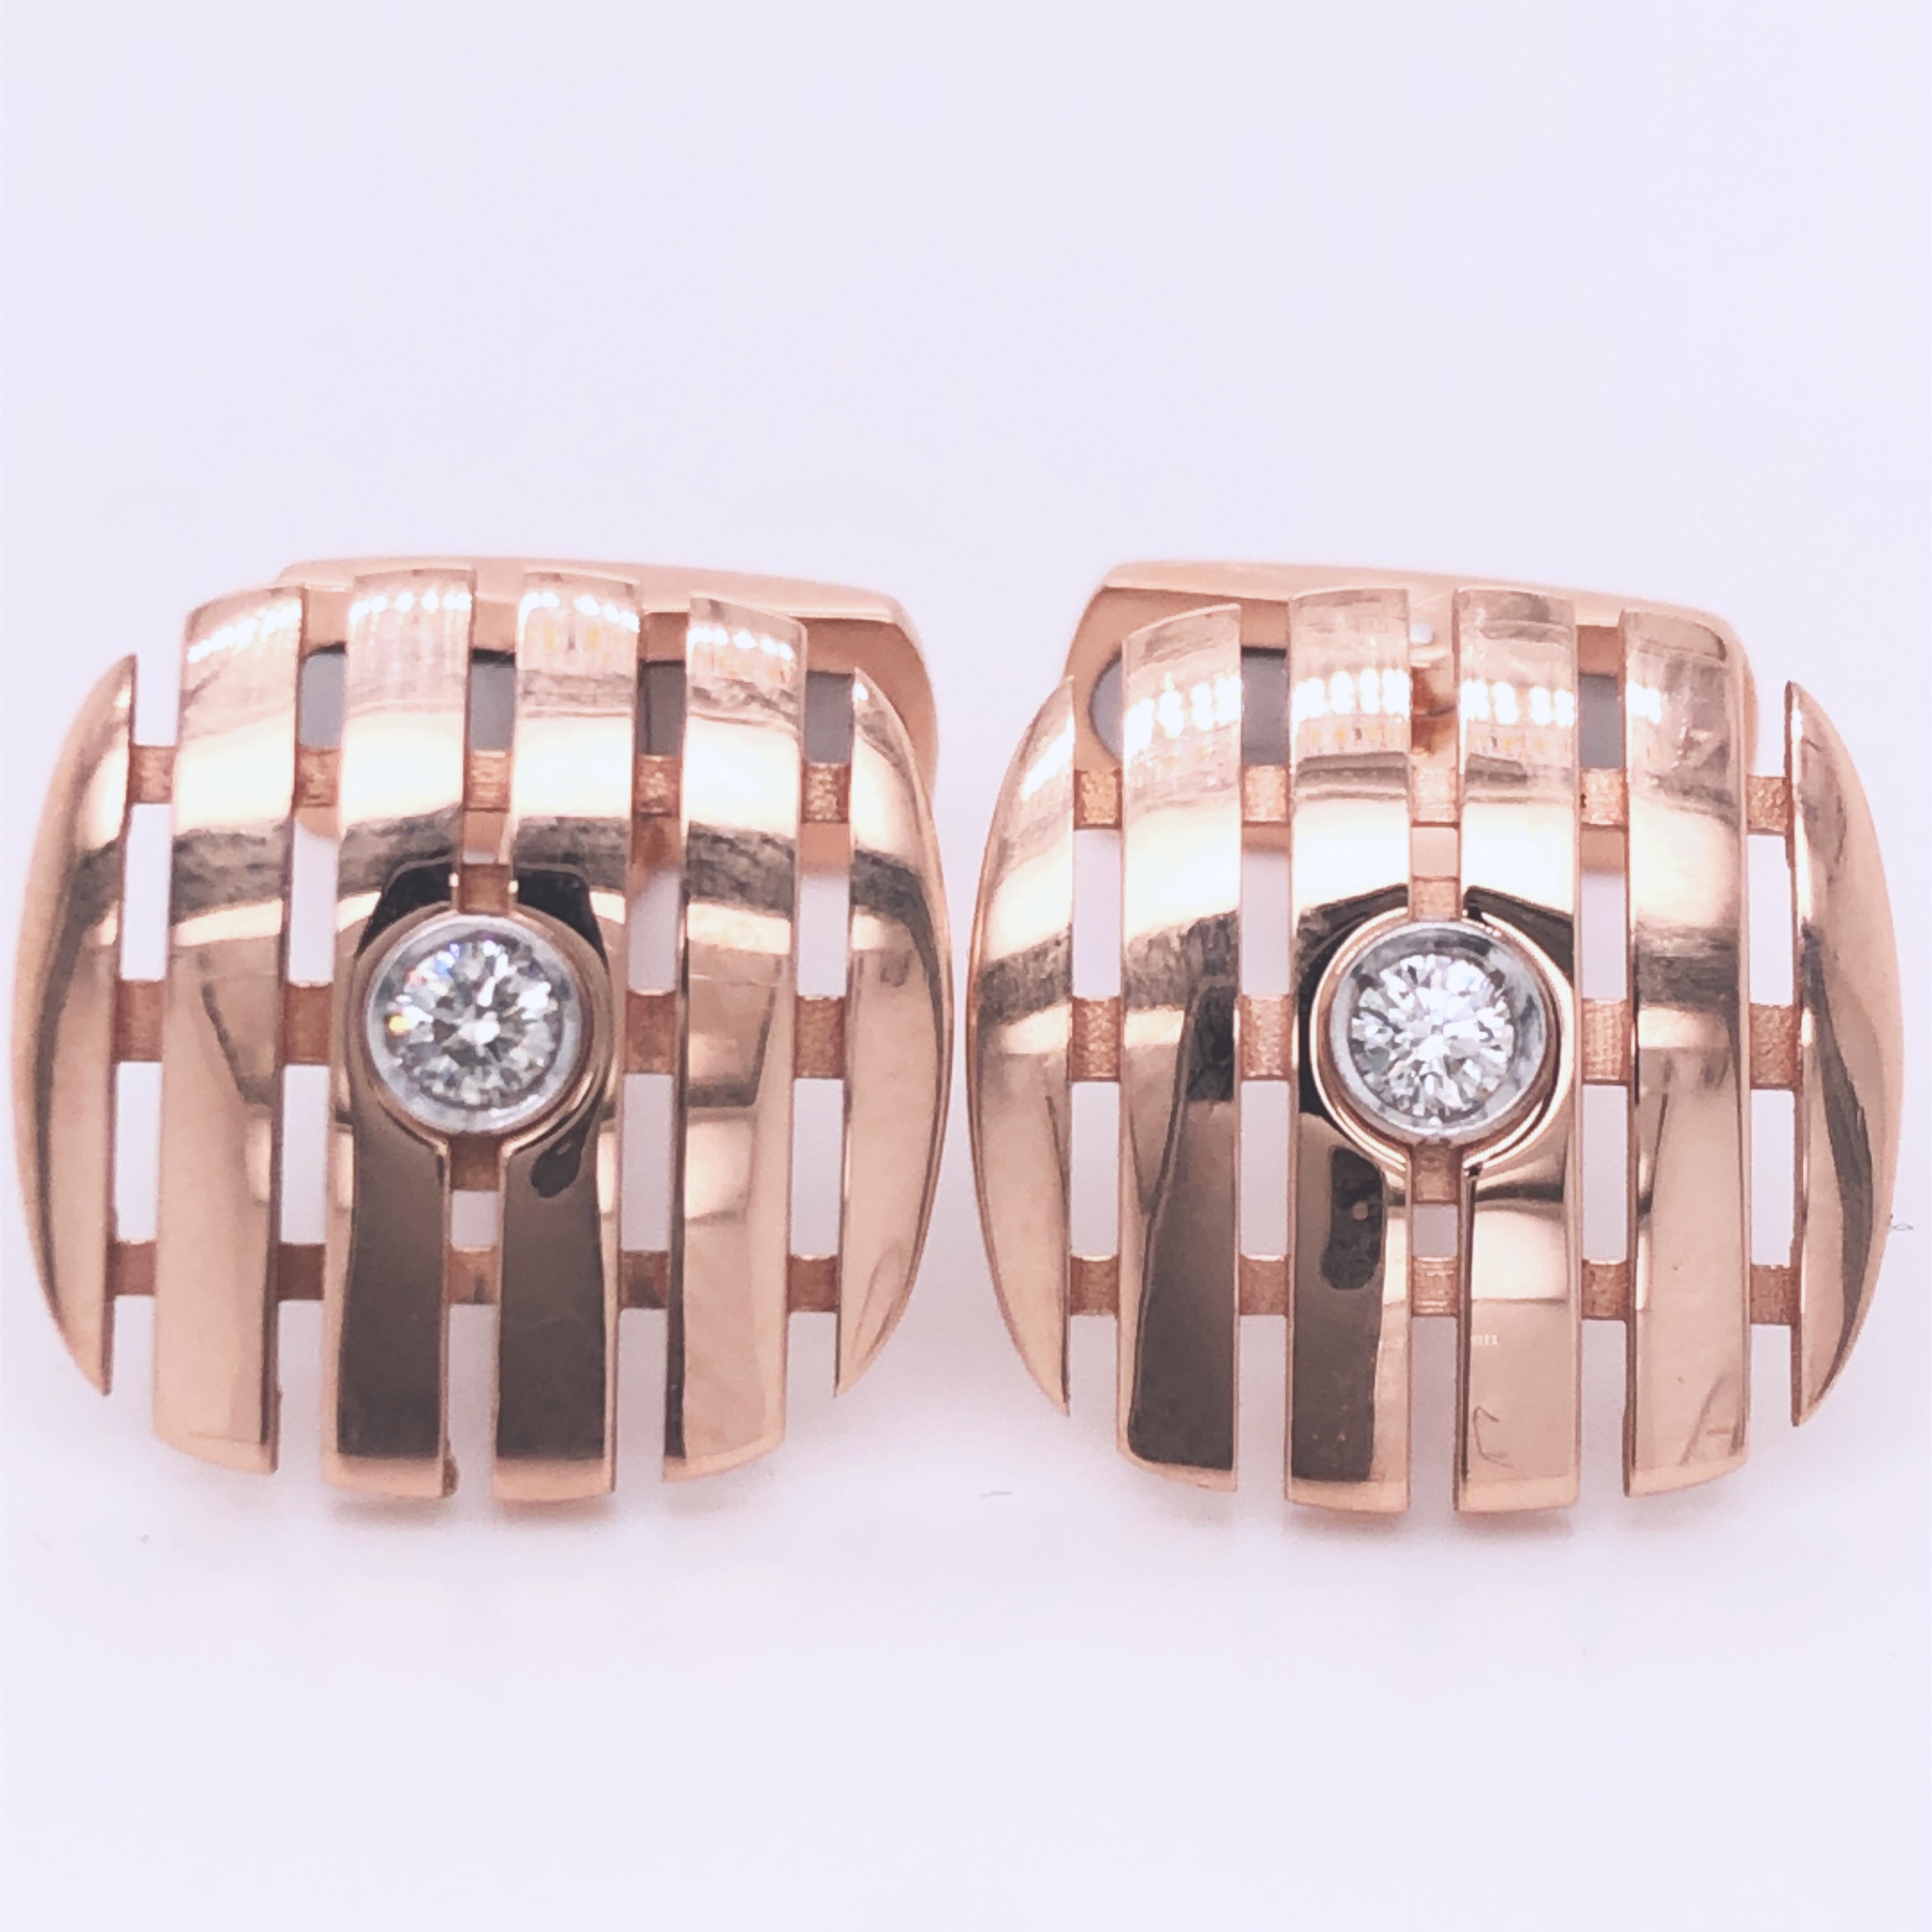 Berca White Diamond Squared Shaped 18 Karat Rose Gold Cufflinks In New Condition For Sale In Valenza, IT